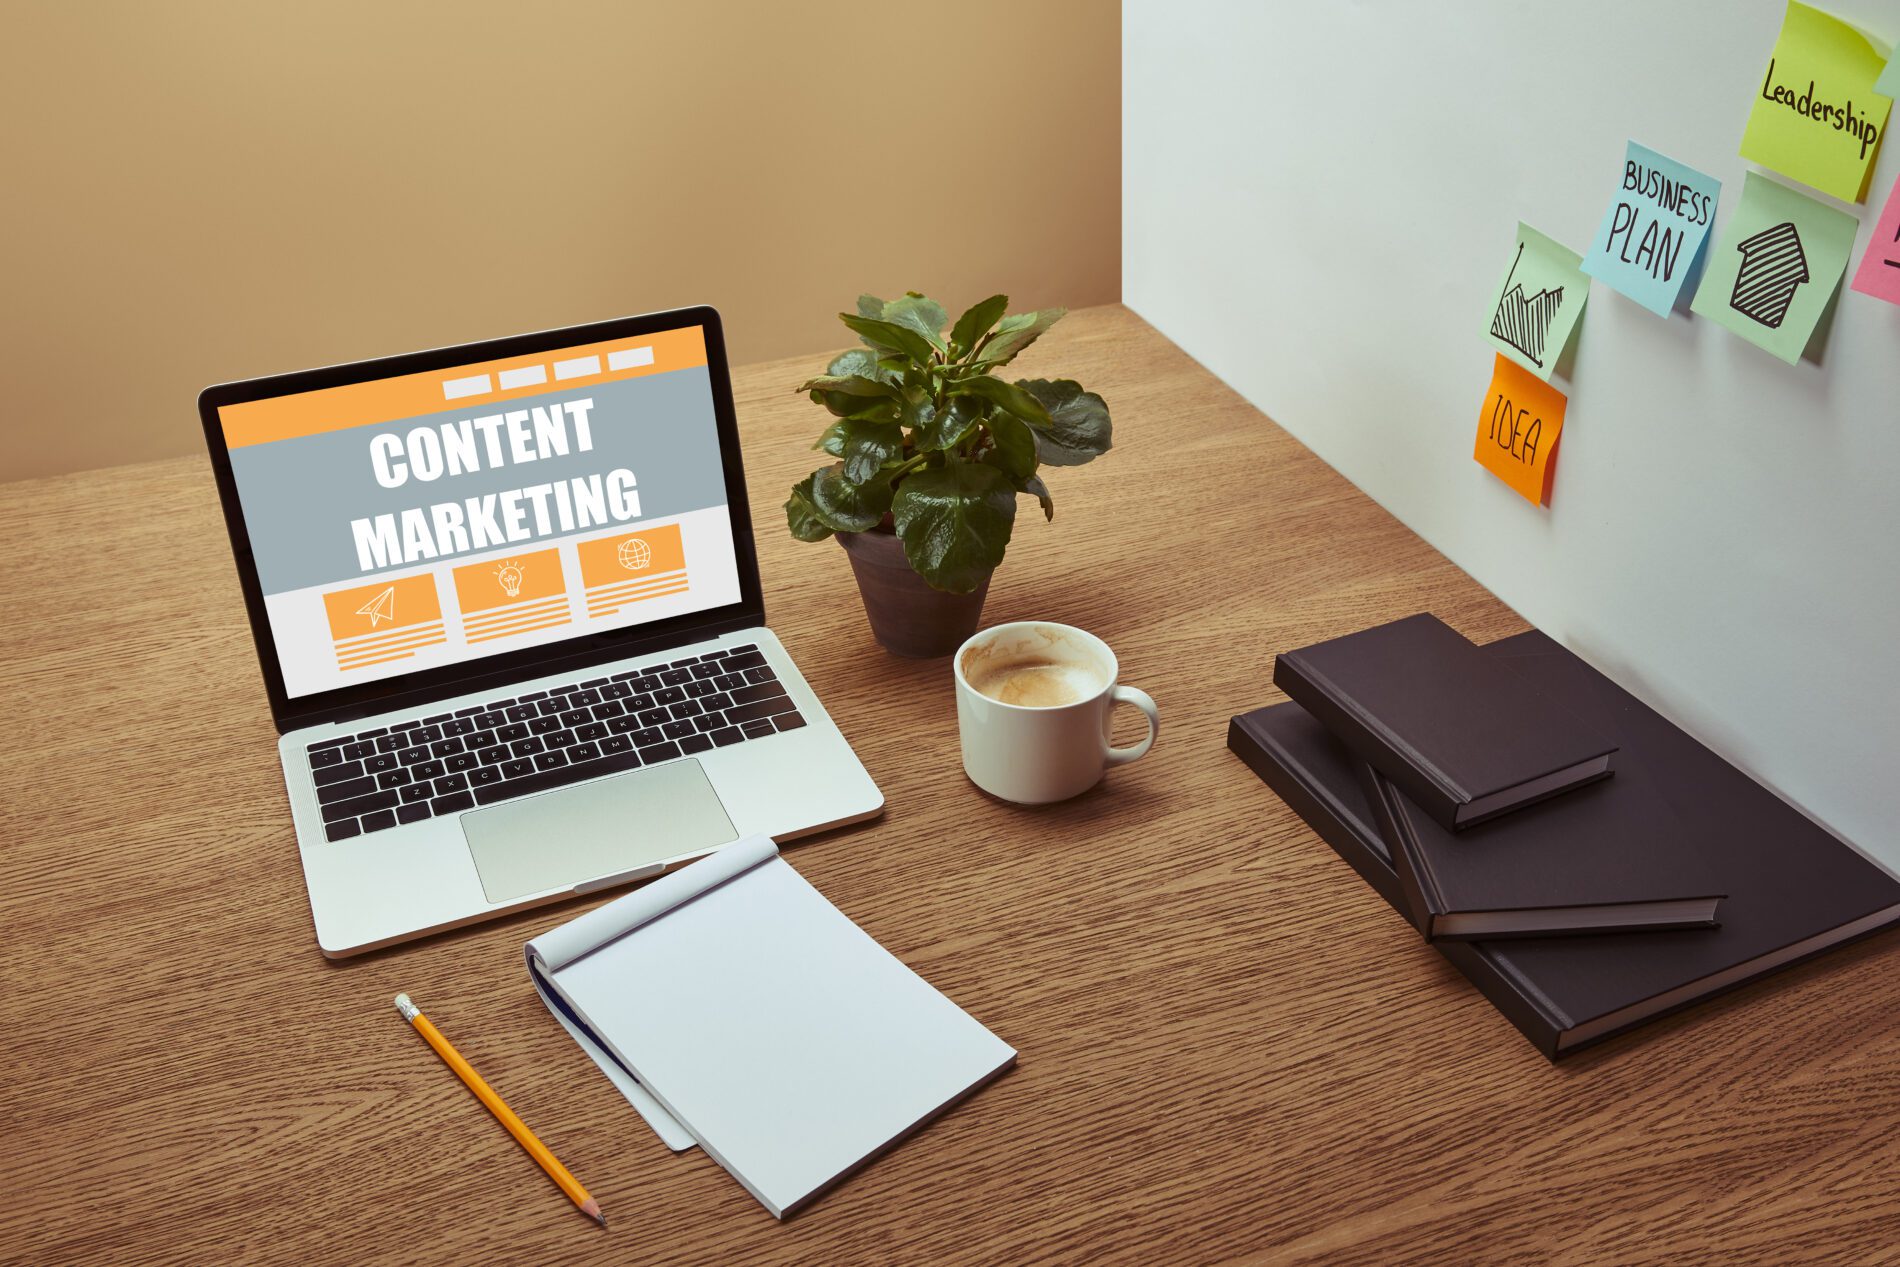 5 Content Marketing Rules That You Can’t Afford To Break